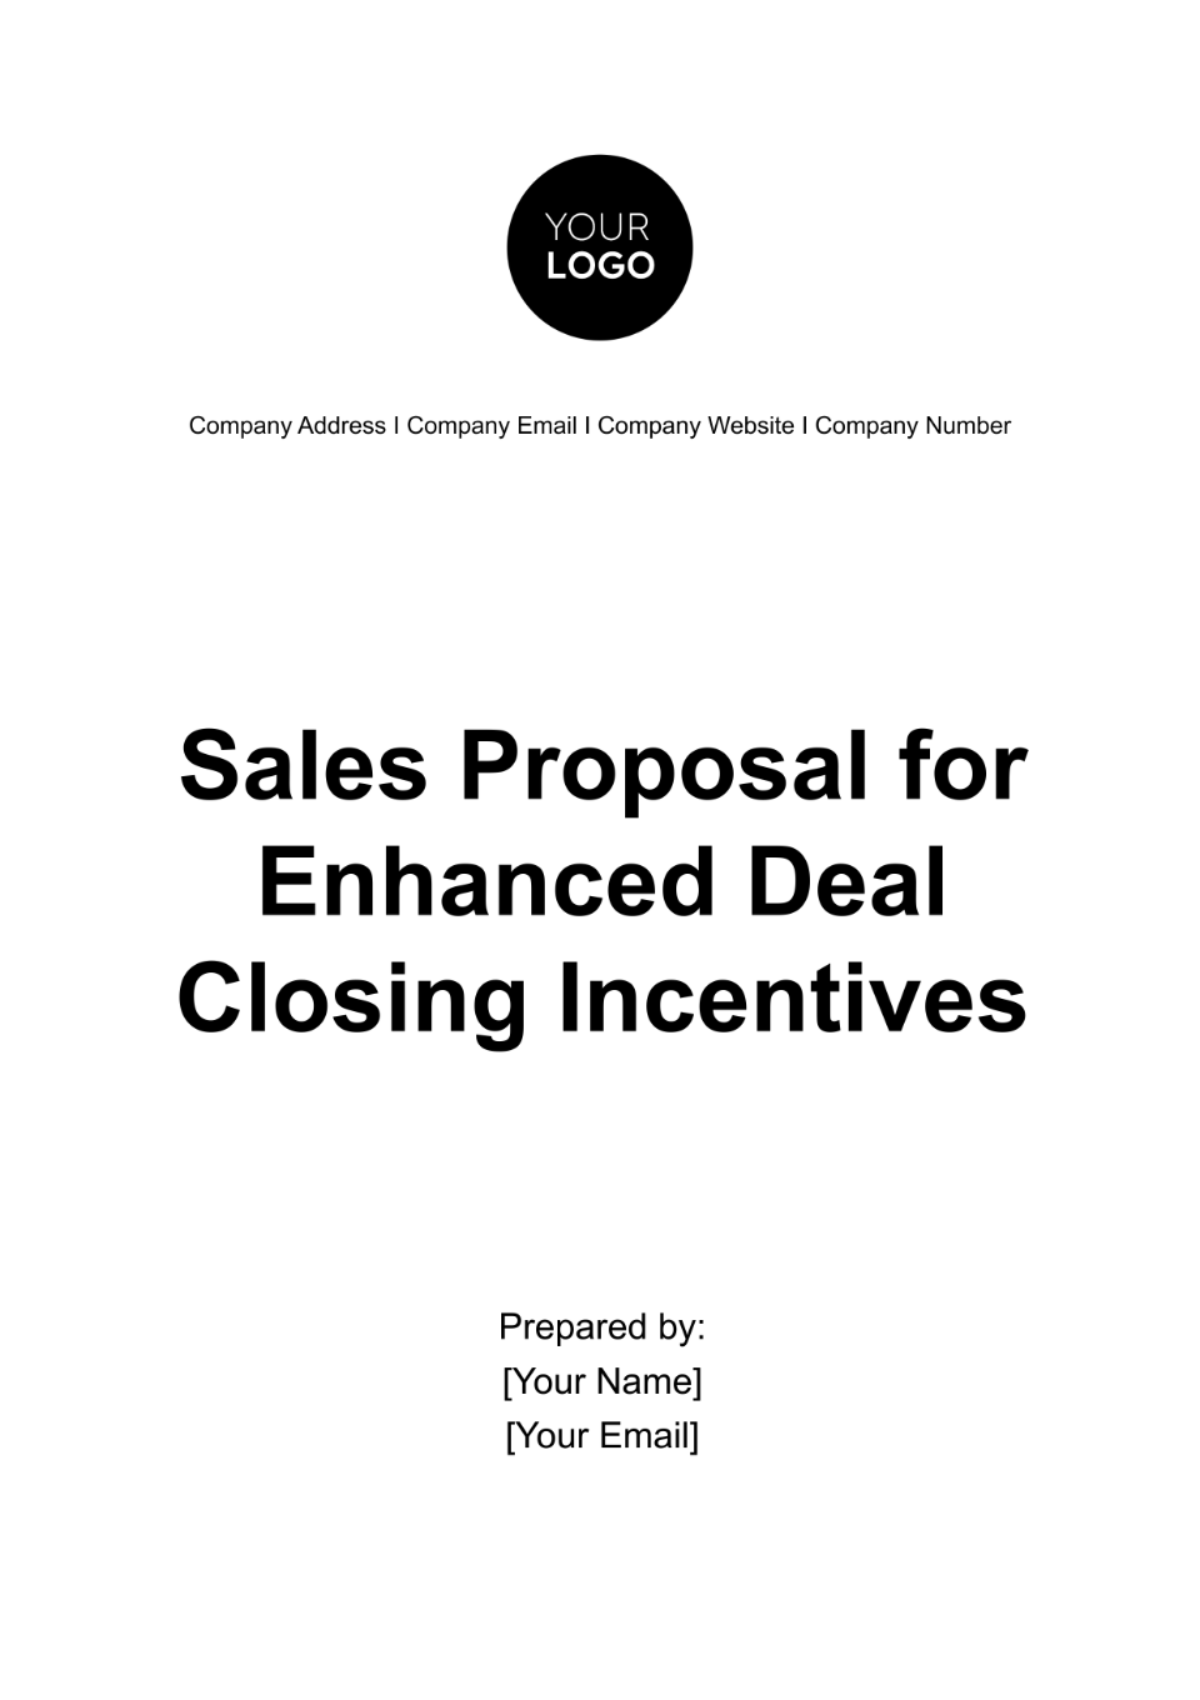 Free Sales Proposal for Enhanced Deal Closing Incentives Template